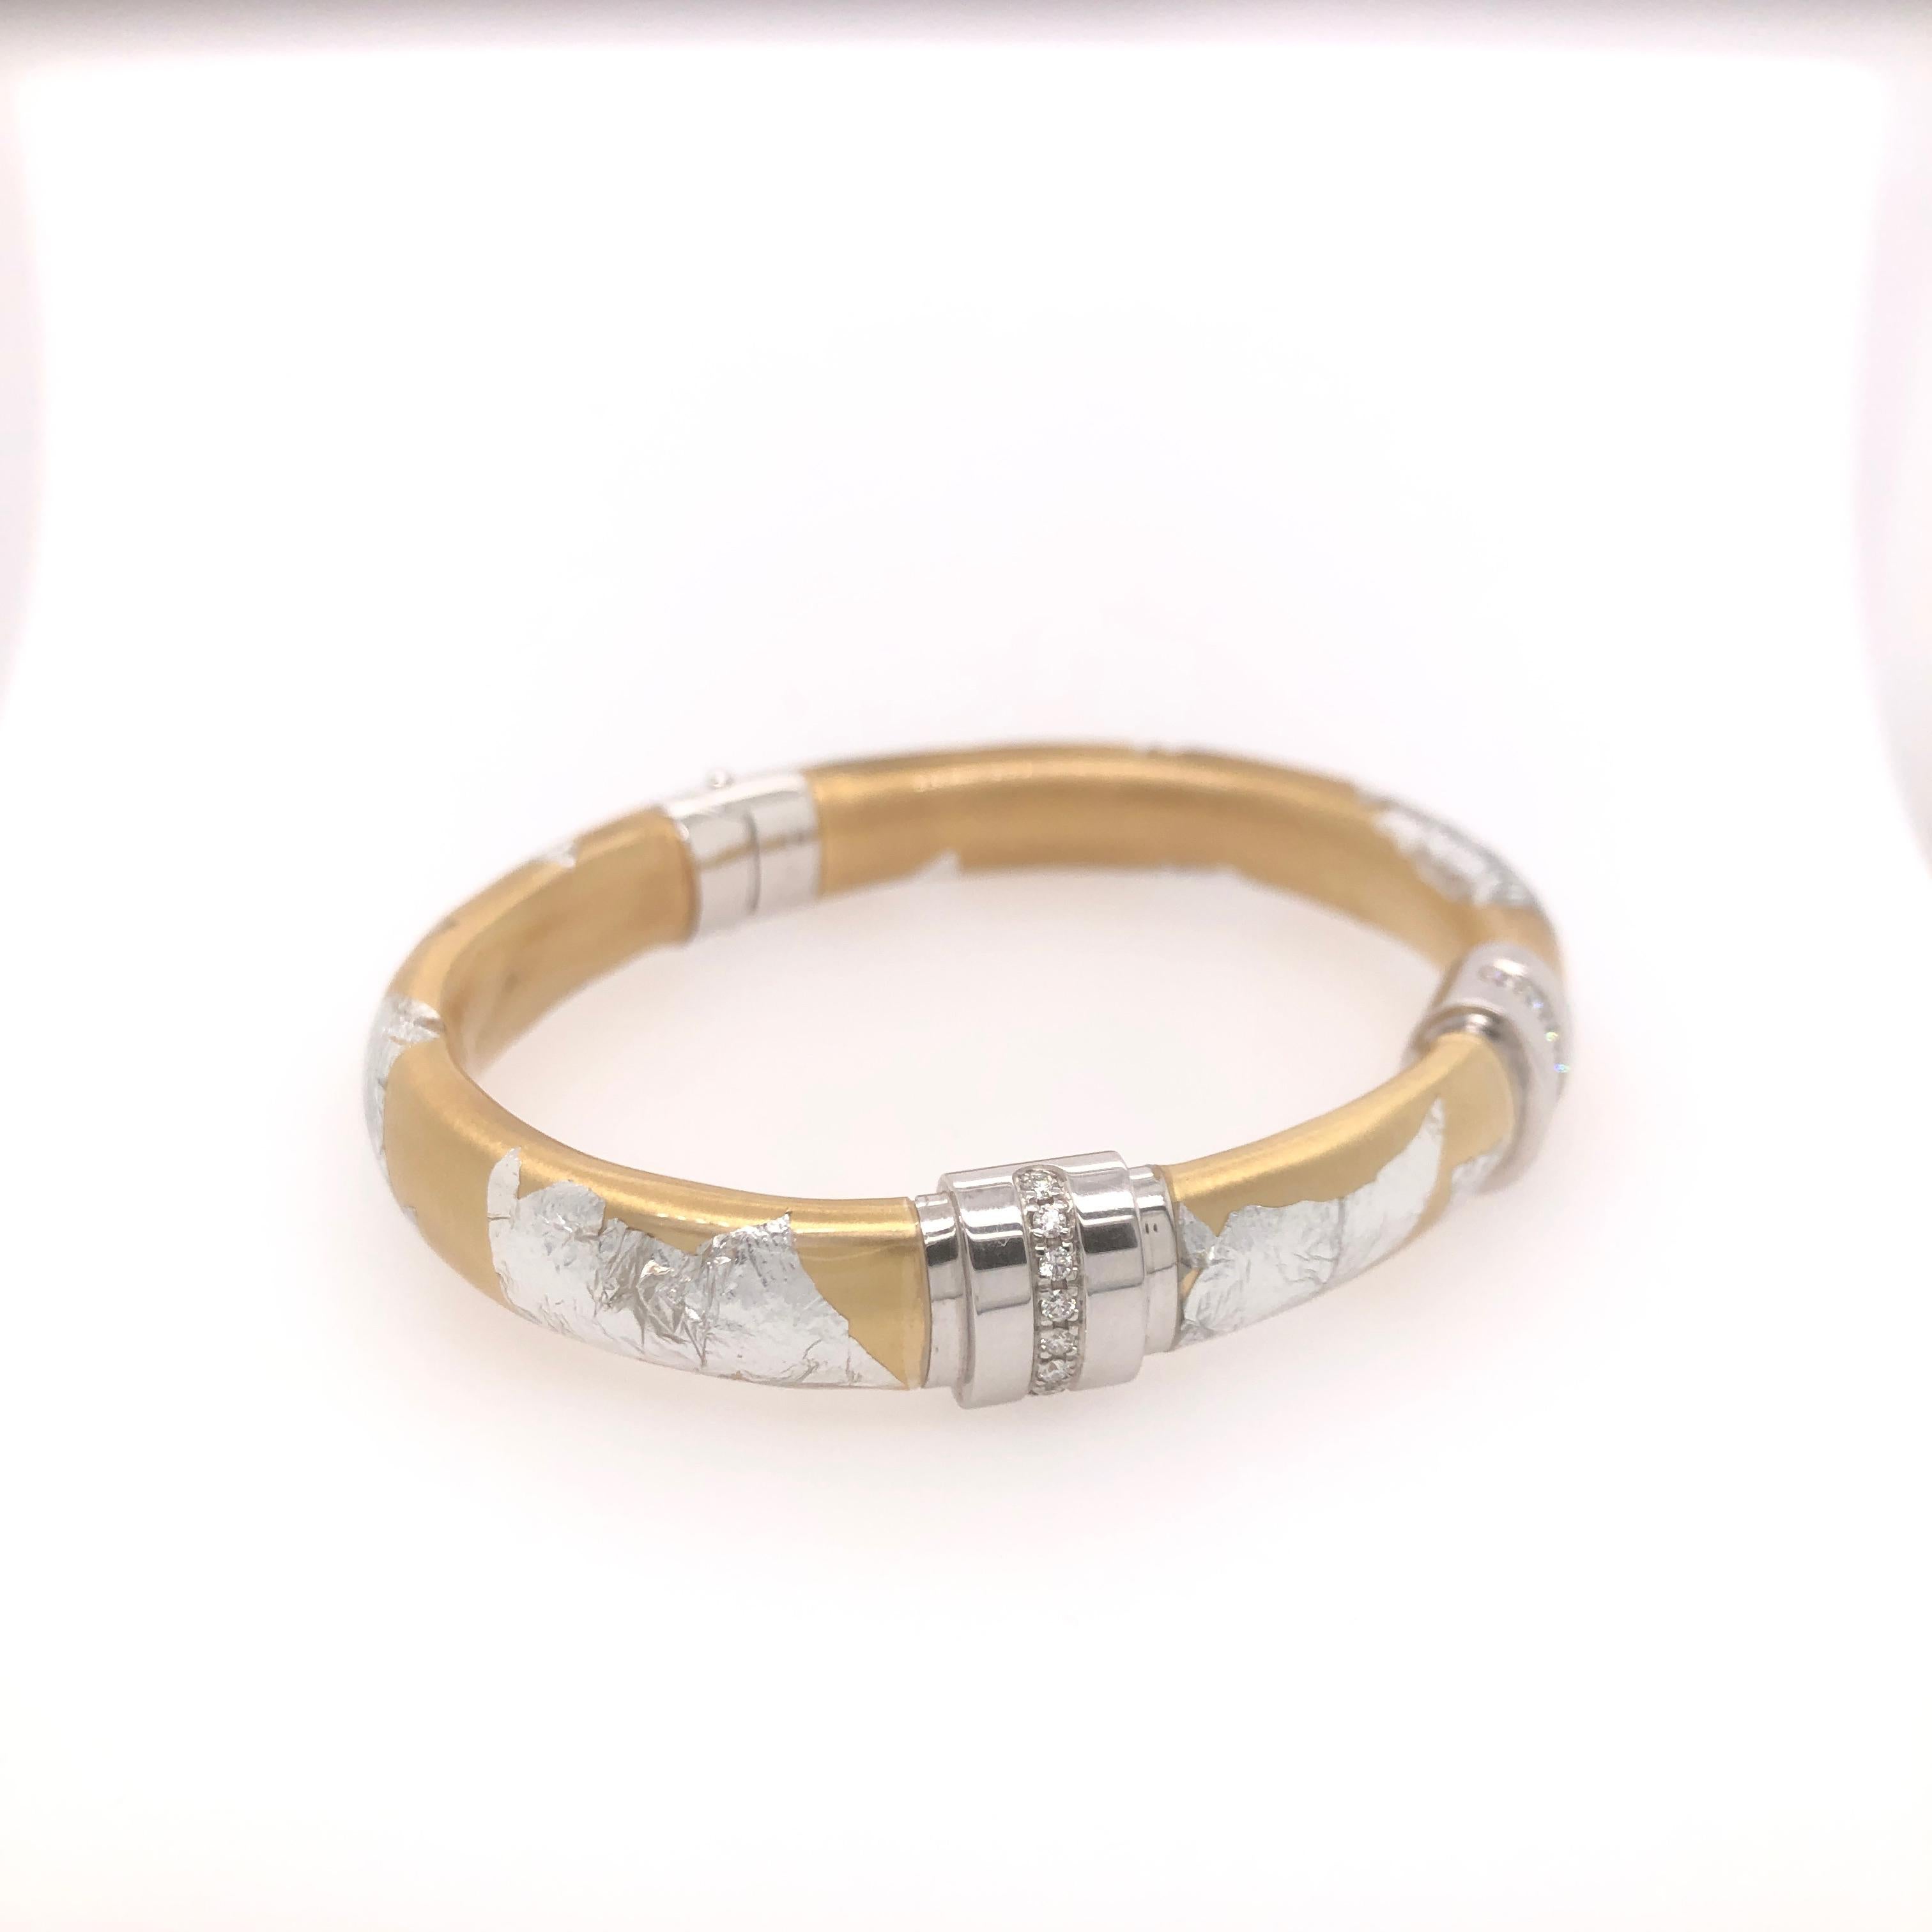 SOHO Wide Silver and Gold Foliage Bangle with Diamonds.

Total diamond carat weight: 0.48CT

Stamped: SOHO SLVR